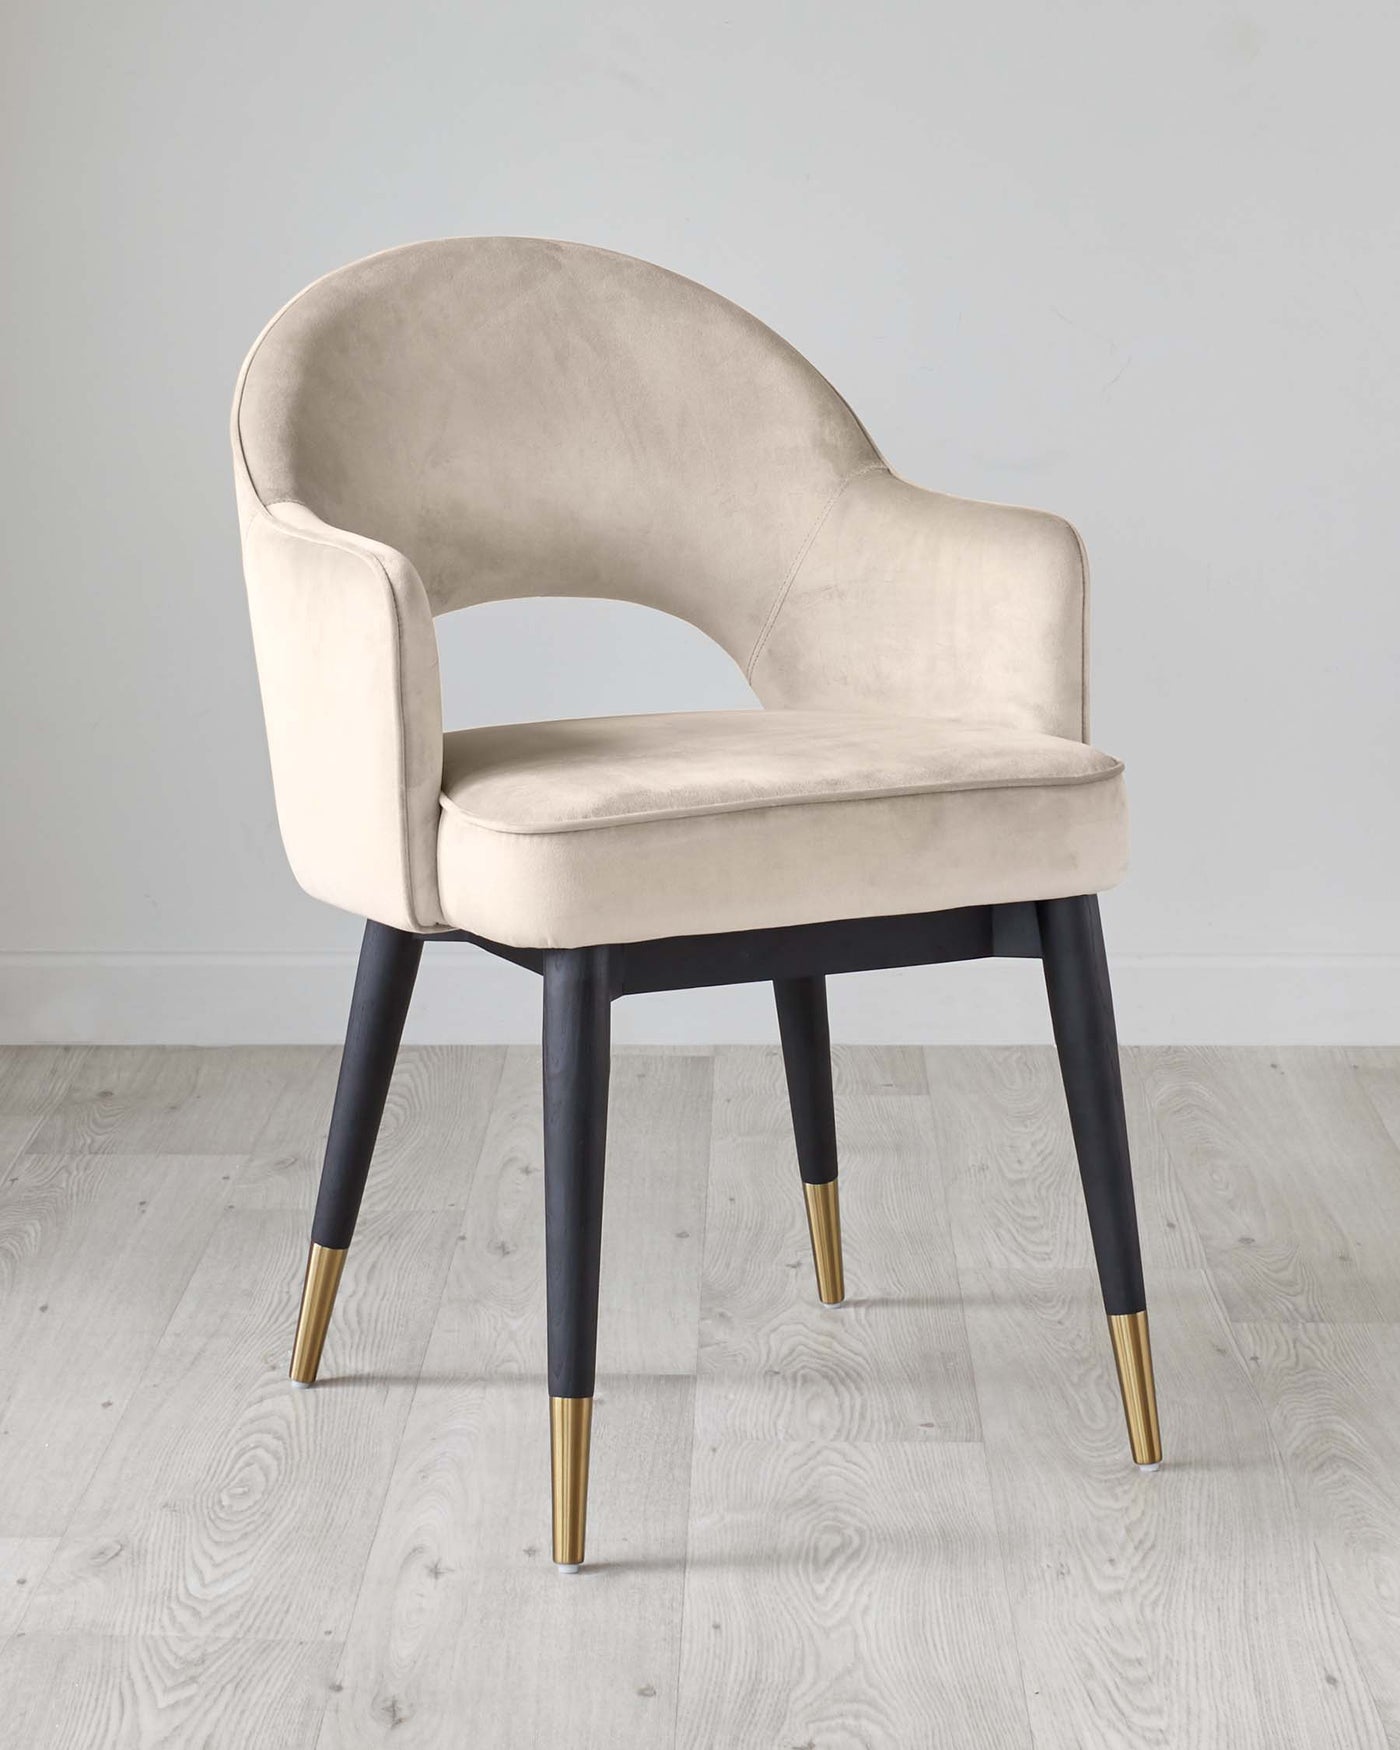 Elegant modern accent chair with a curved backrest and plush light beige velvet upholstery. It features dark wooden tapered legs with stylish gold-coloured tips, creating a chic contrast. Perfect for adding a luxurious touch to any room decor.